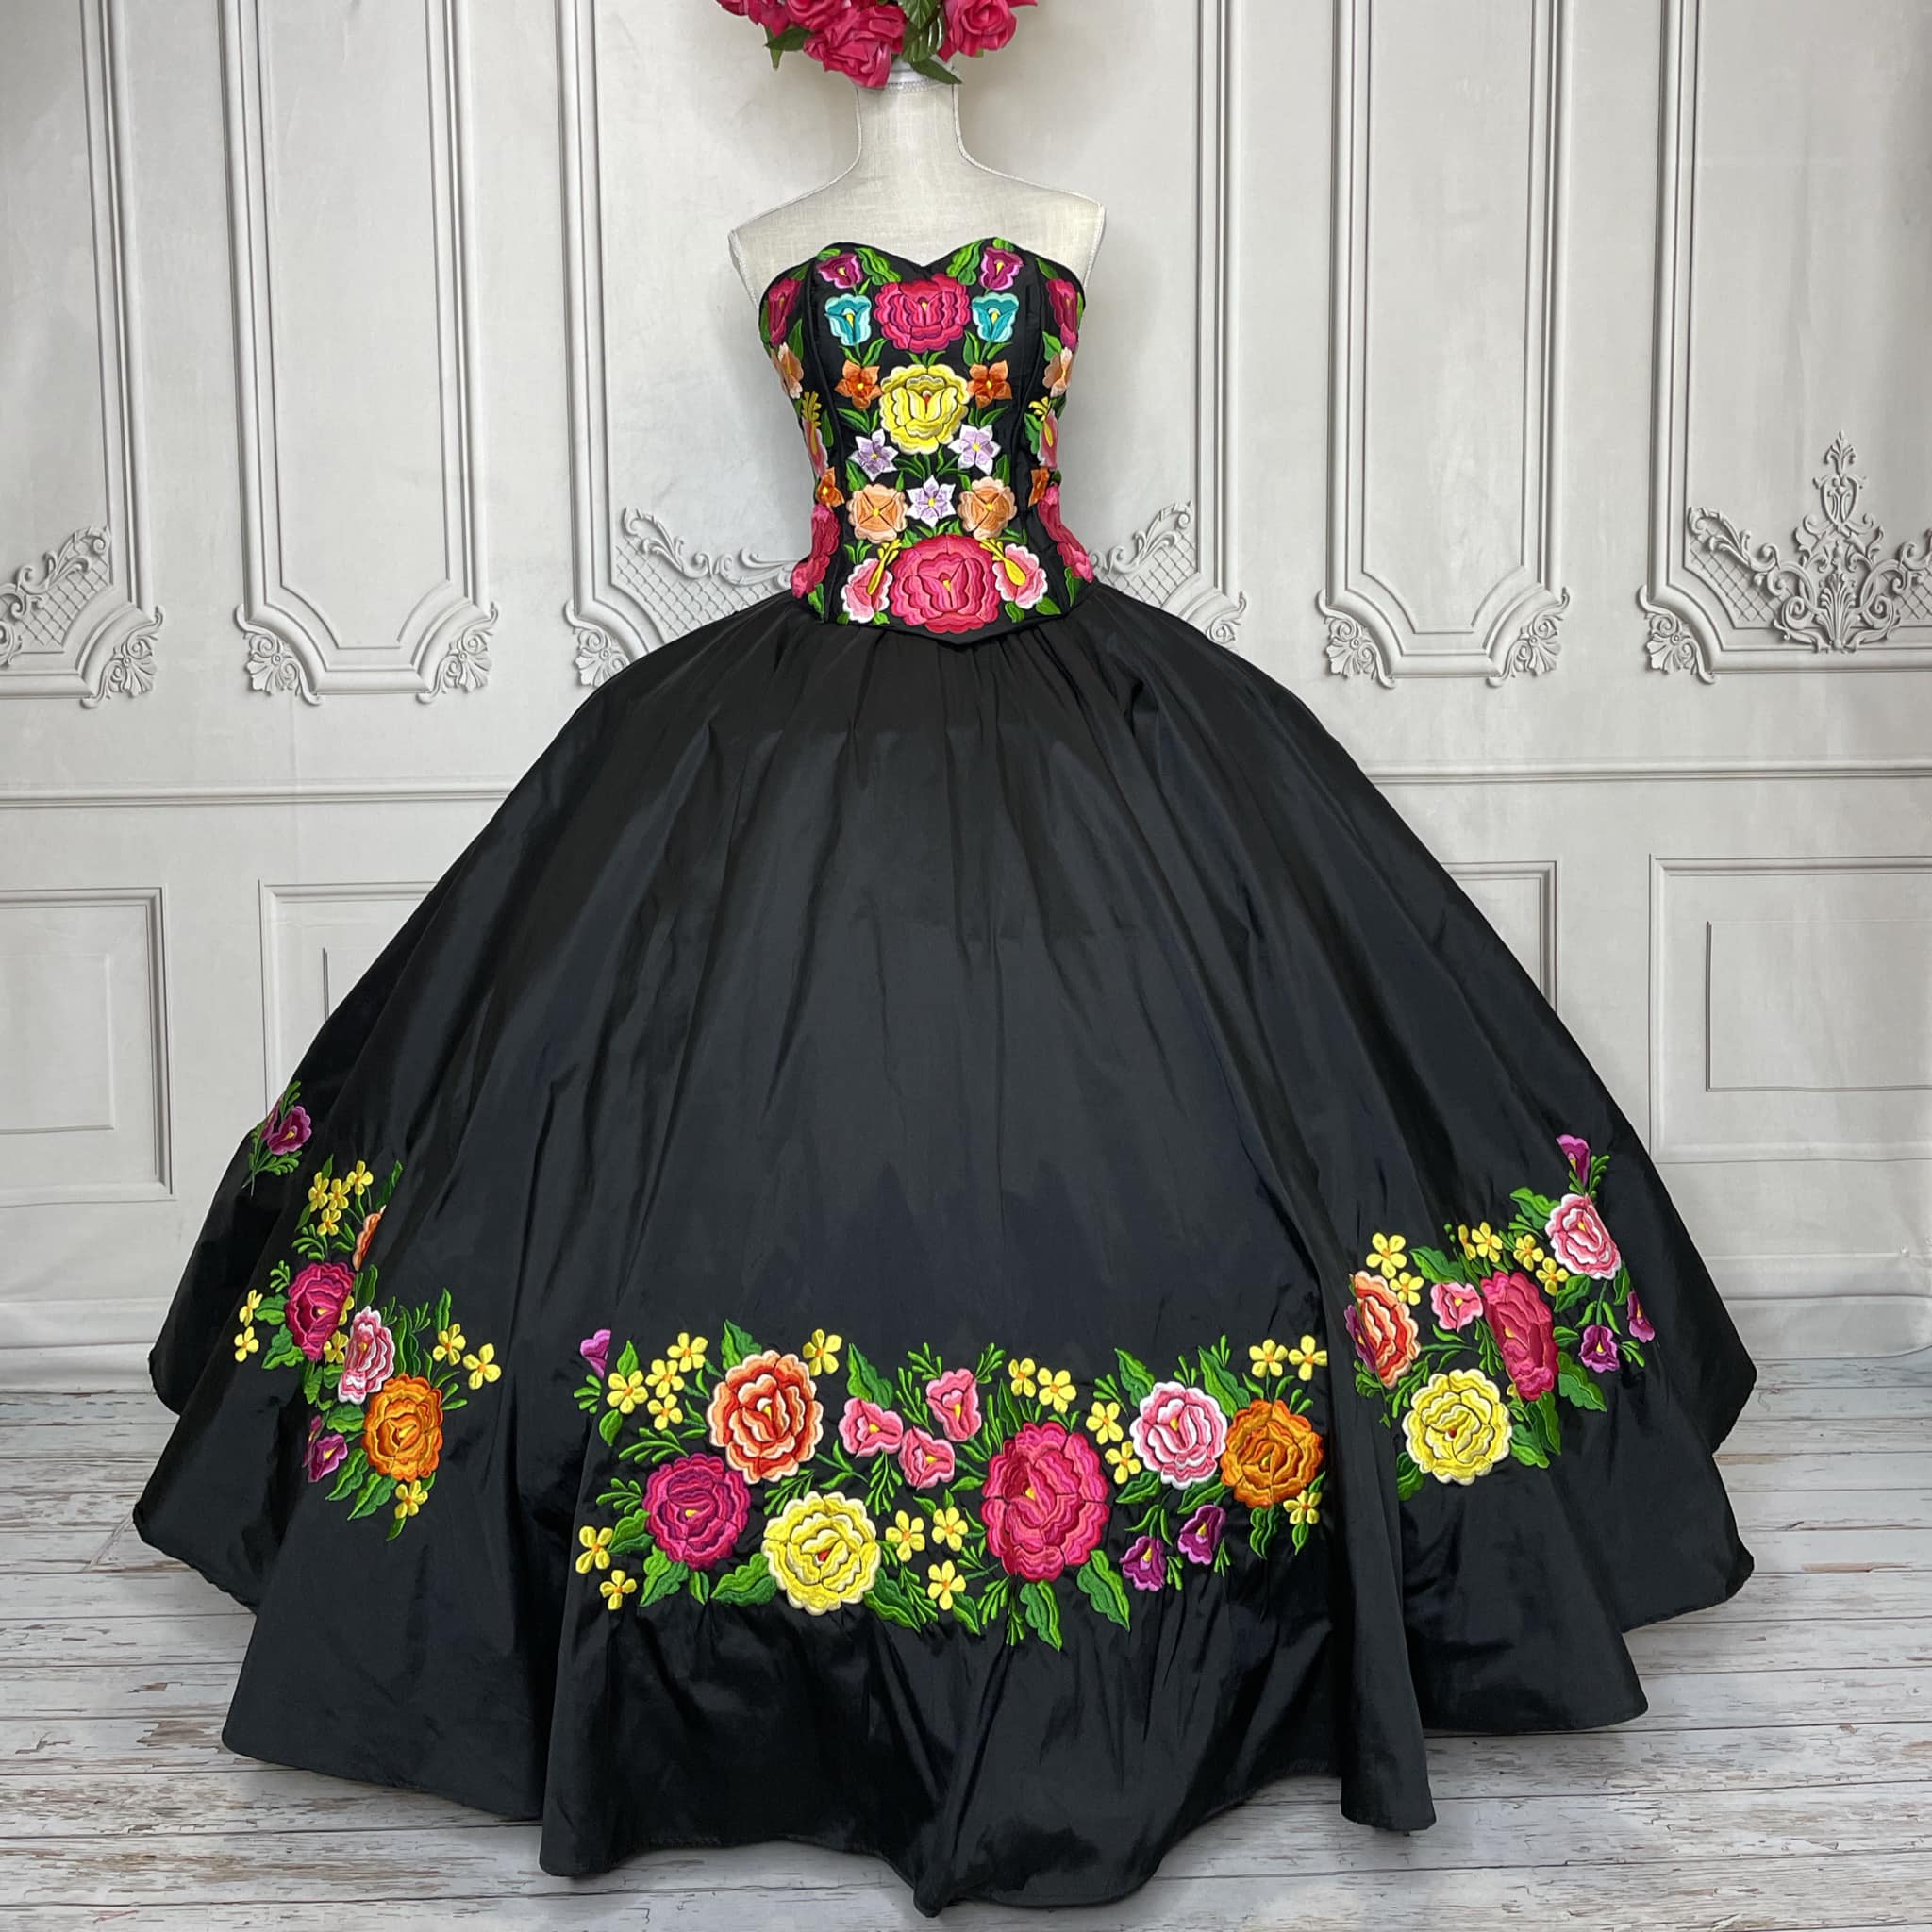 quince dresses from mexico